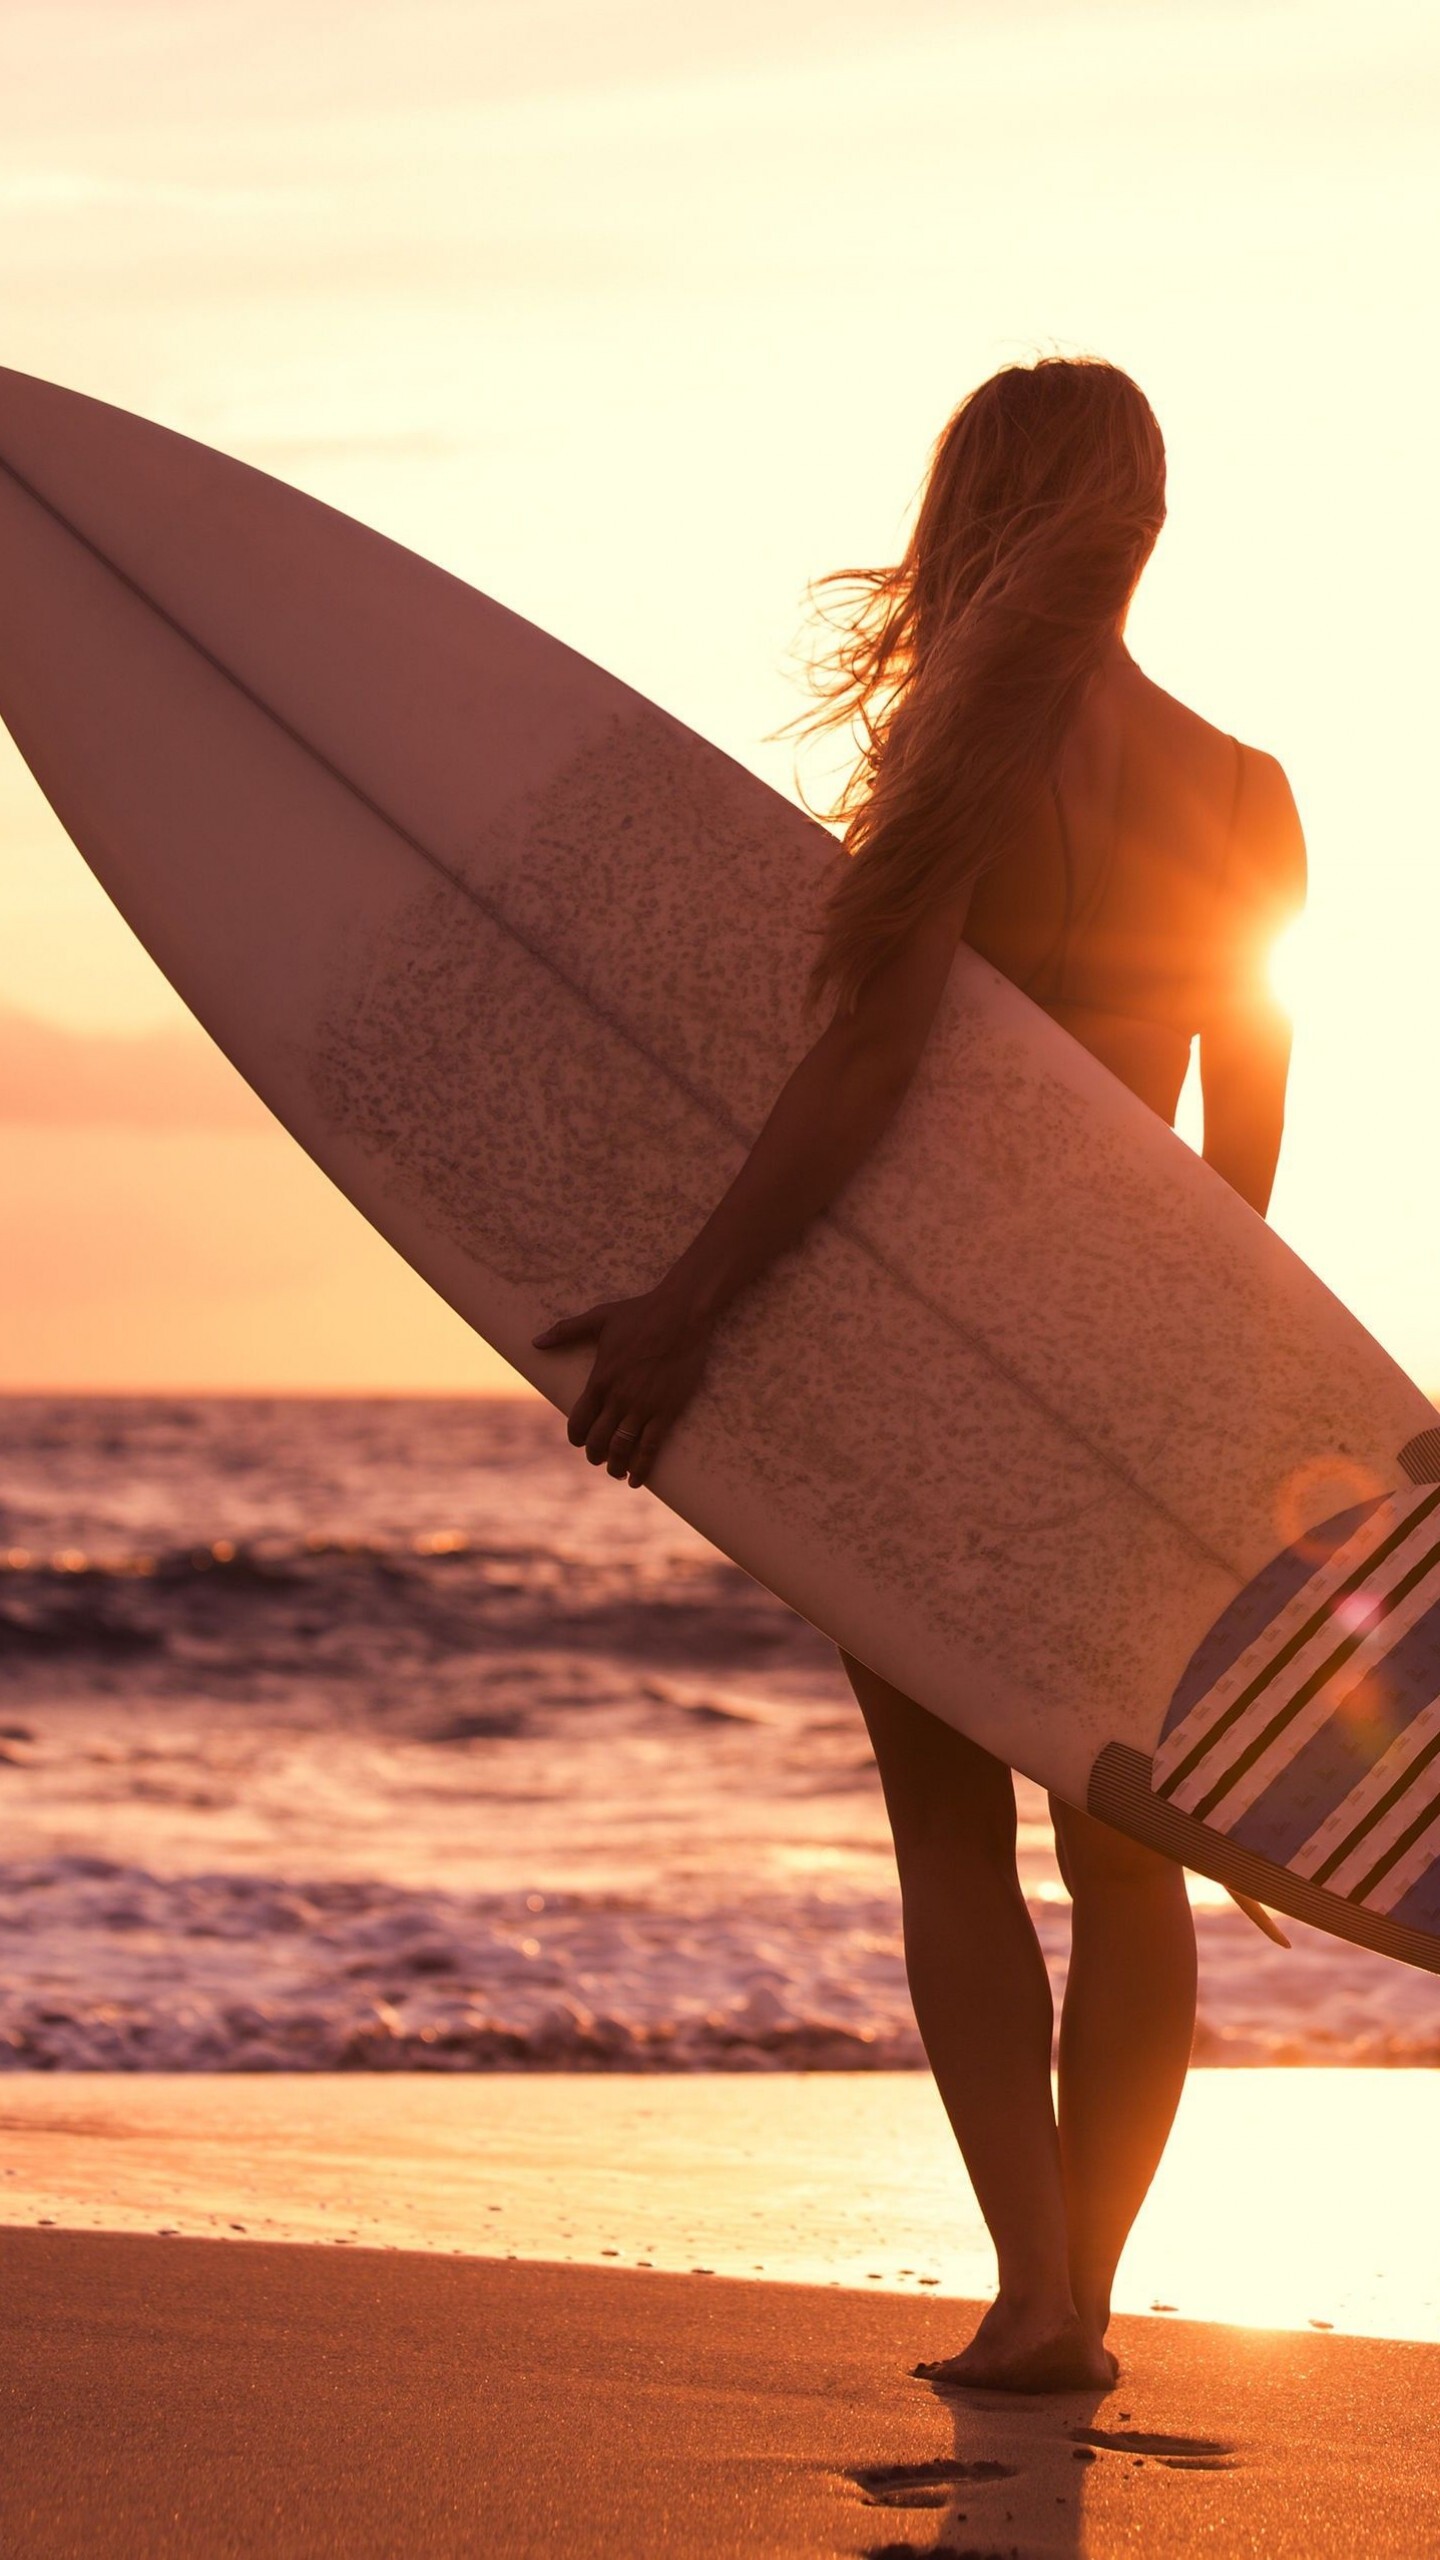 Girl Surfing: Recreational water sports in the sunset, Ocean shores water sports discipline. 1440x2560 HD Wallpaper.